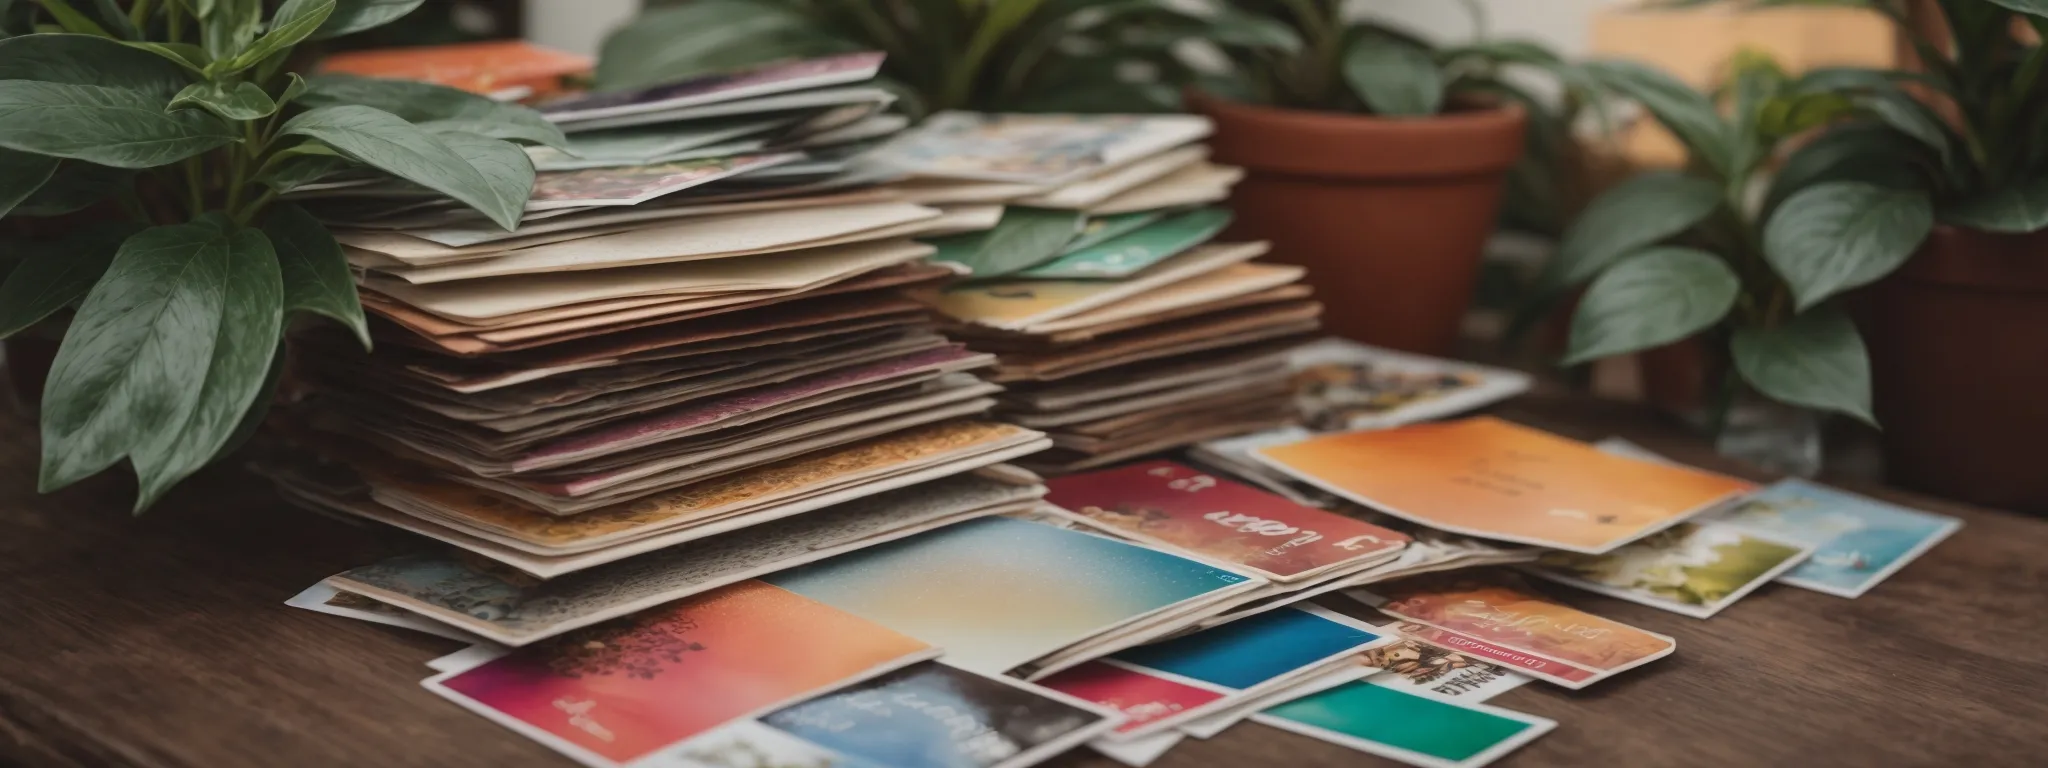 a stack of colorful postcards on a wooden table beside a potted plant.